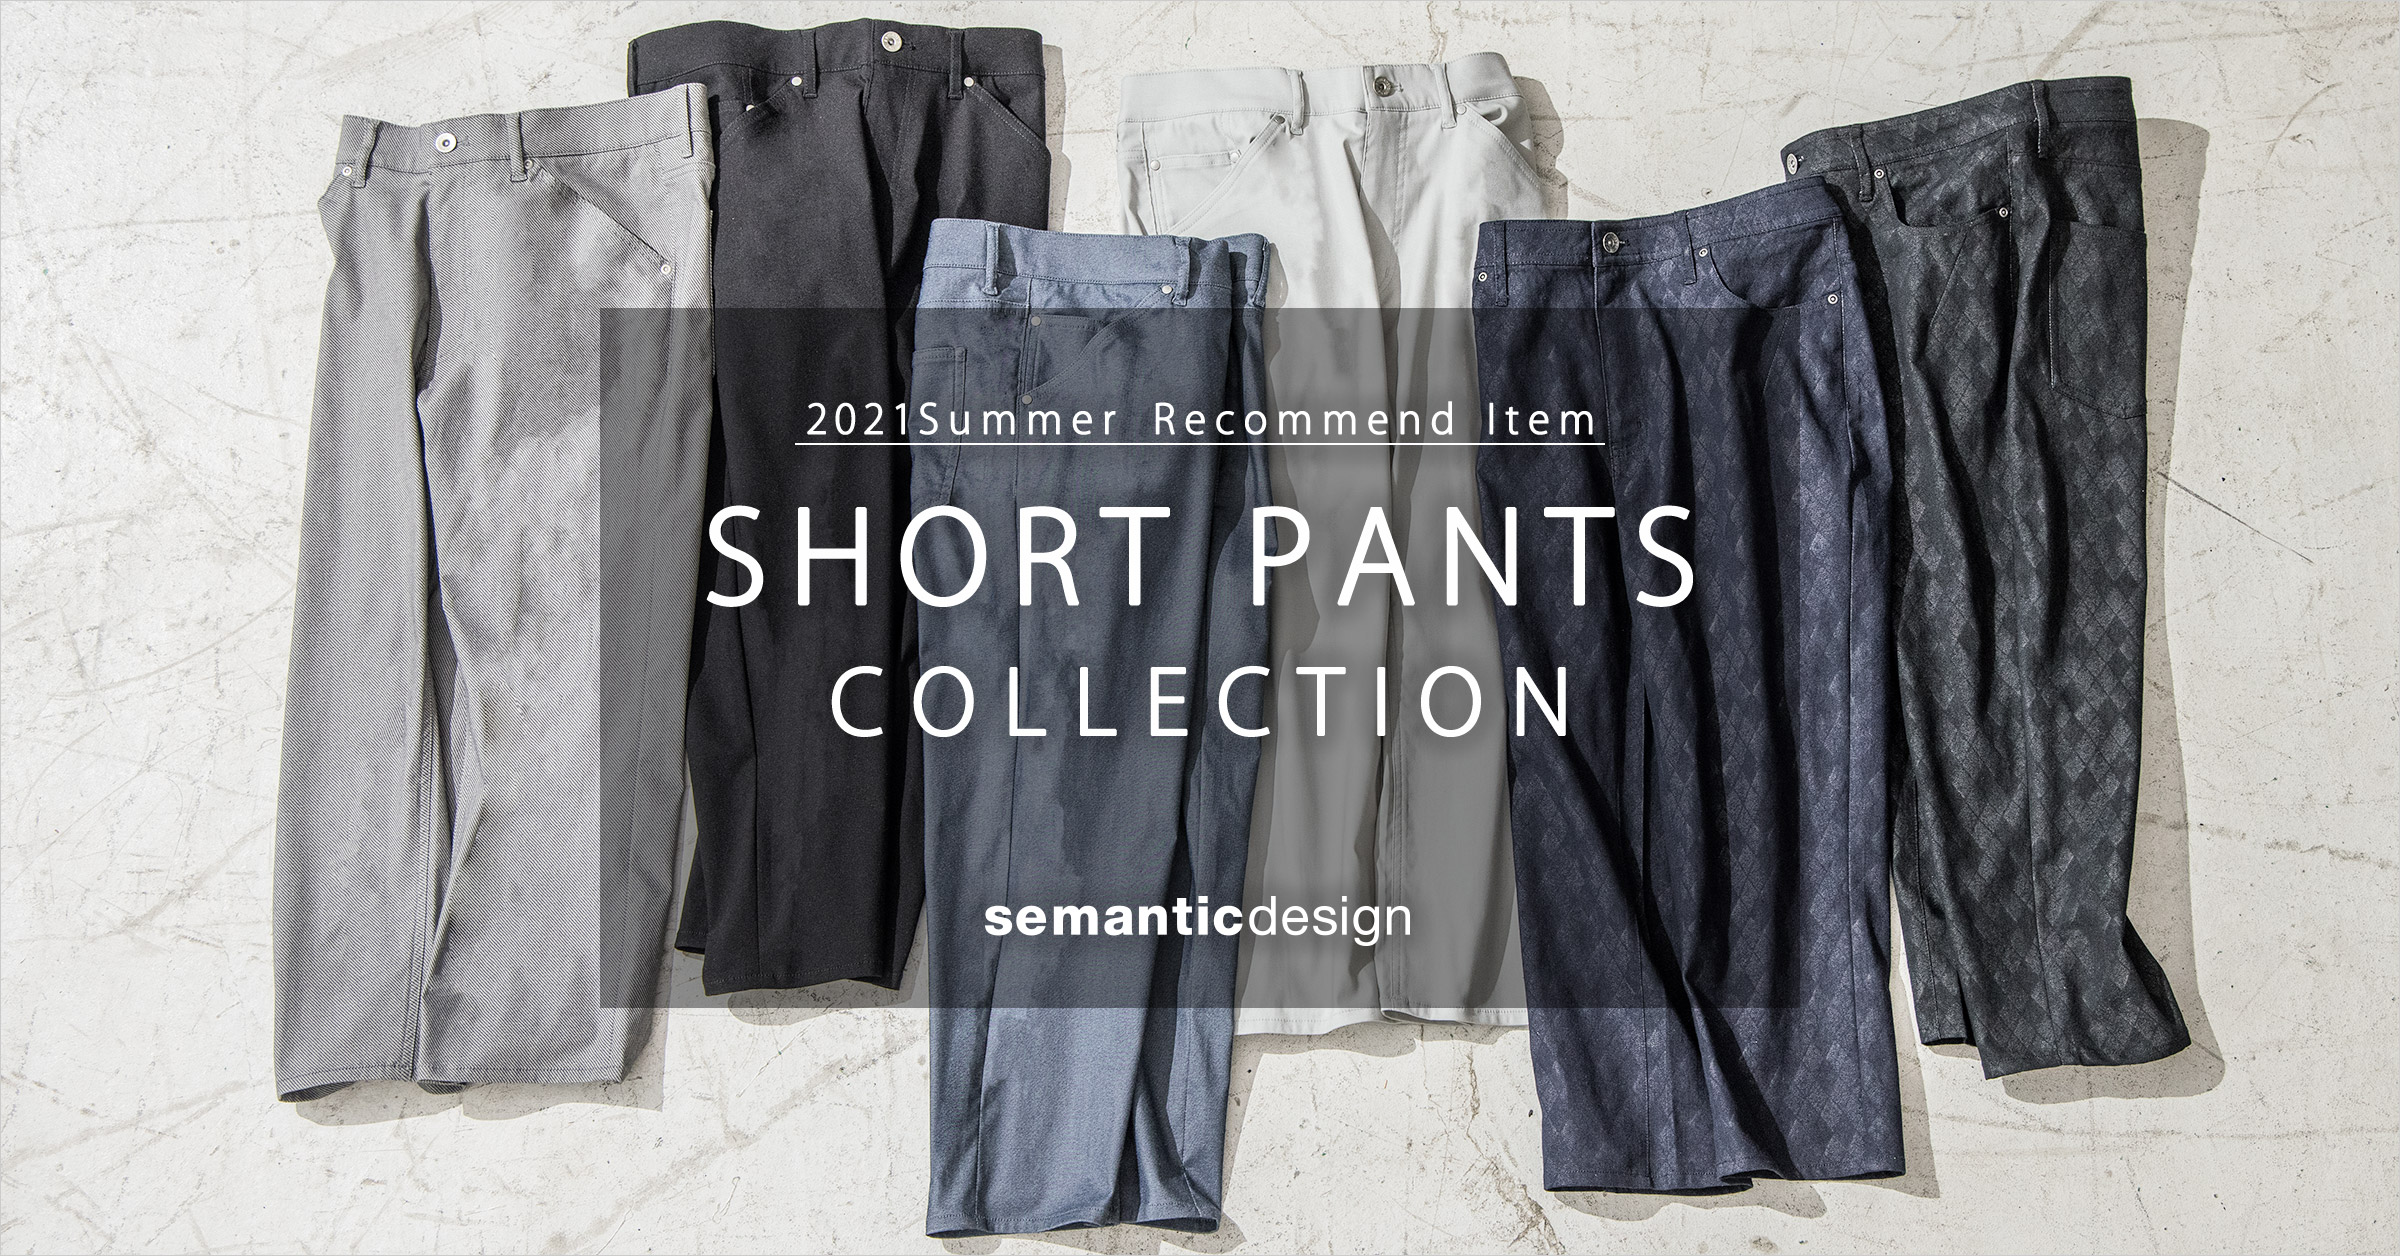 SHORT PANTS COLLECTION